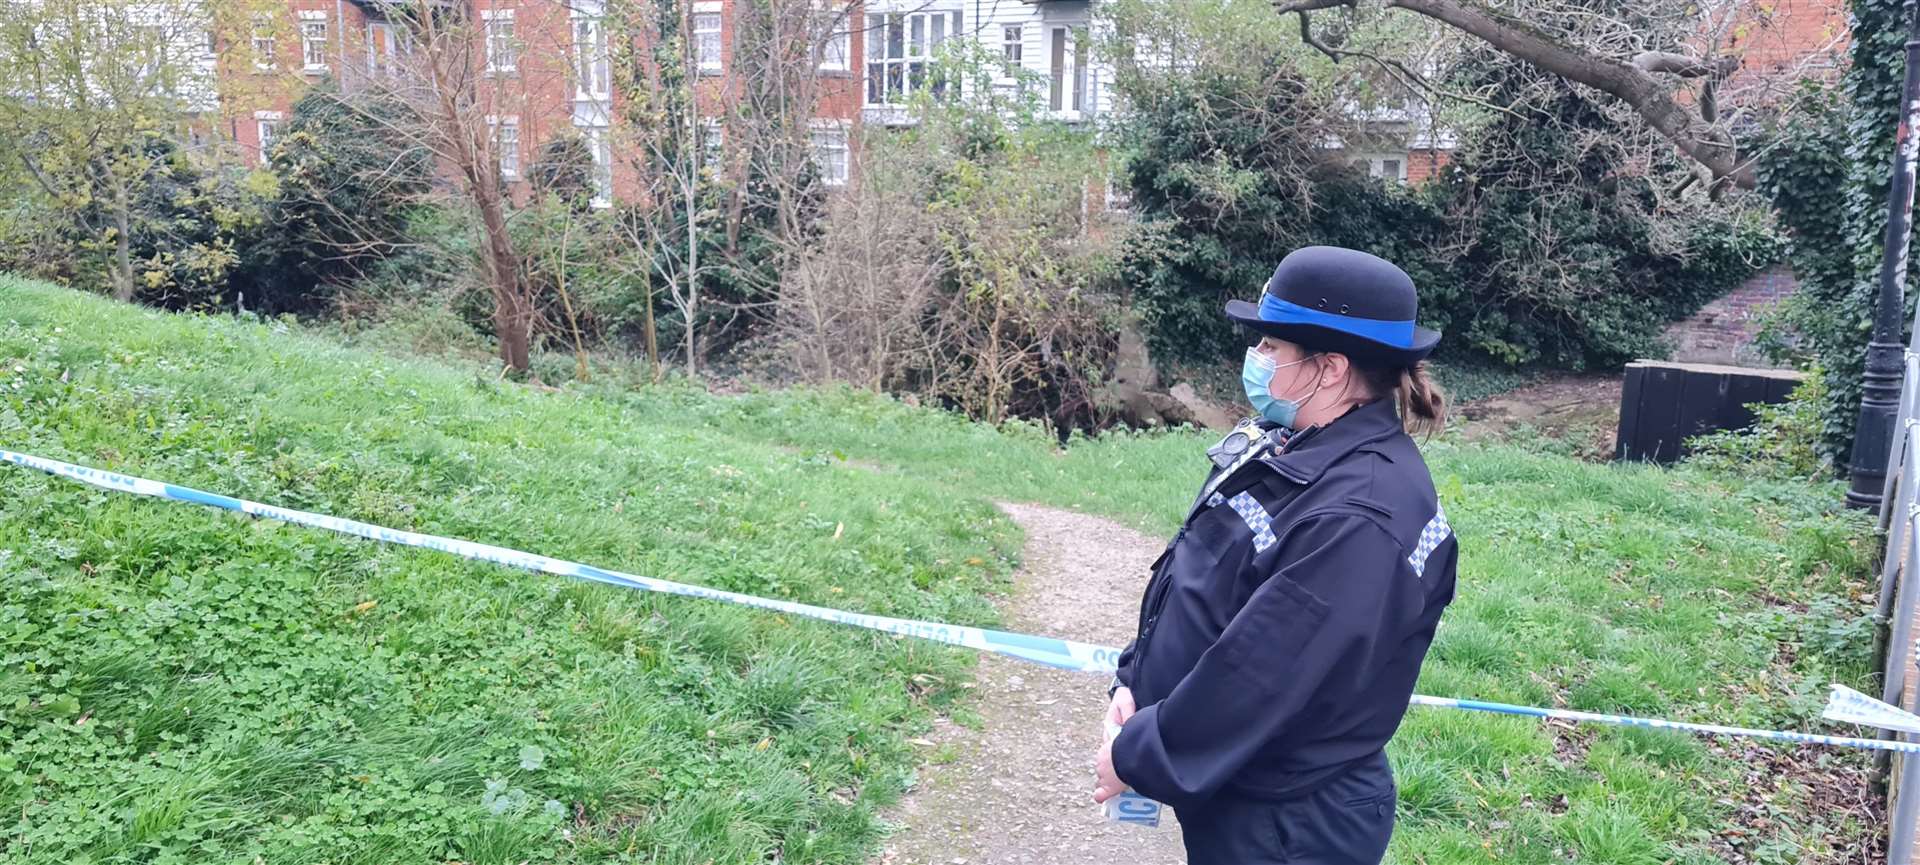 A section of the River Stour has been taped off by police